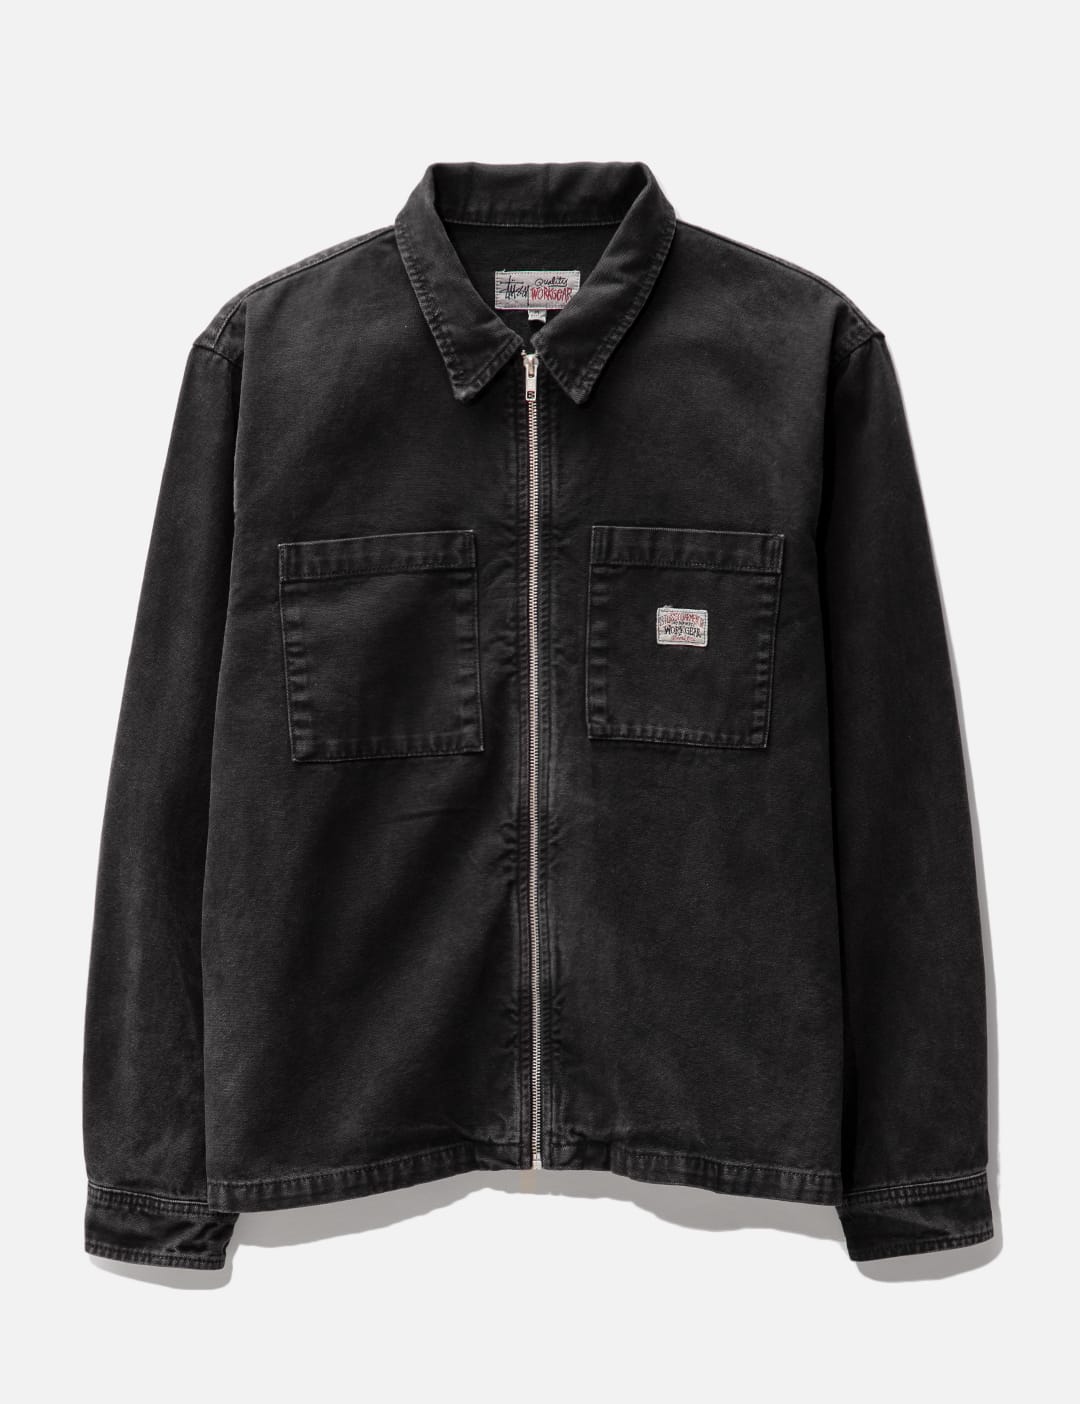 Stüssy - Washed Canvas Zip Shirt | HBX - Globally Curated Fashion 